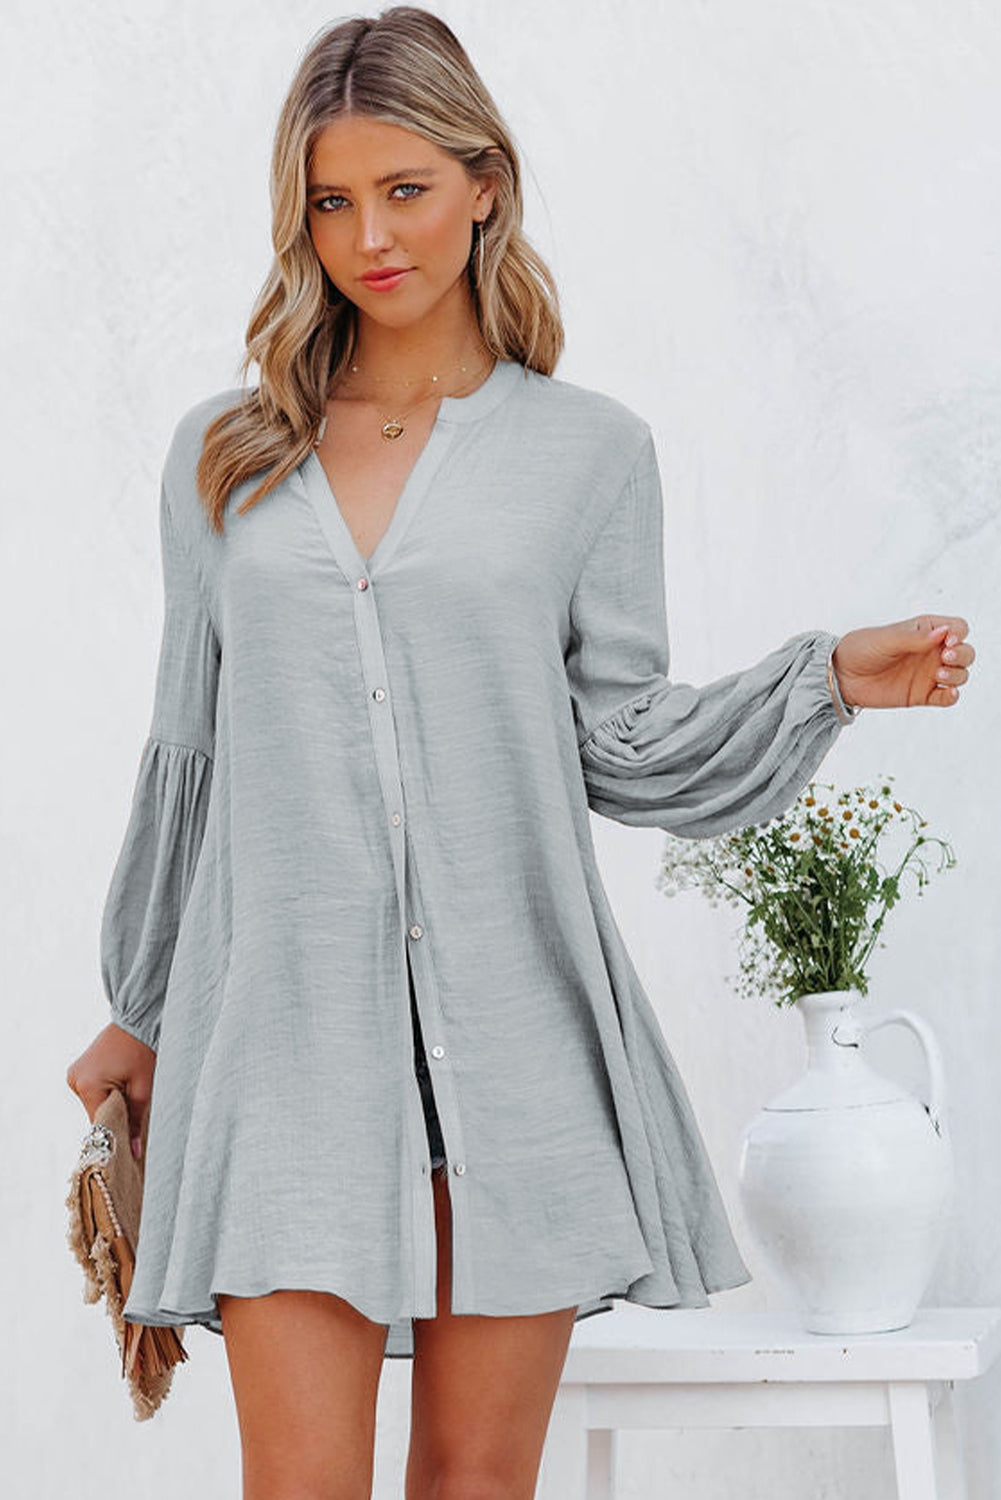 LC2552553-11-S, LC2552553-11-M, LC2552553-11-L, LC2552553-11-XL, LC2552553-11-2XL, Gray Womens Long Sleeve Oversized Blouses Tops Button Up Bishop Sleeve Shirt